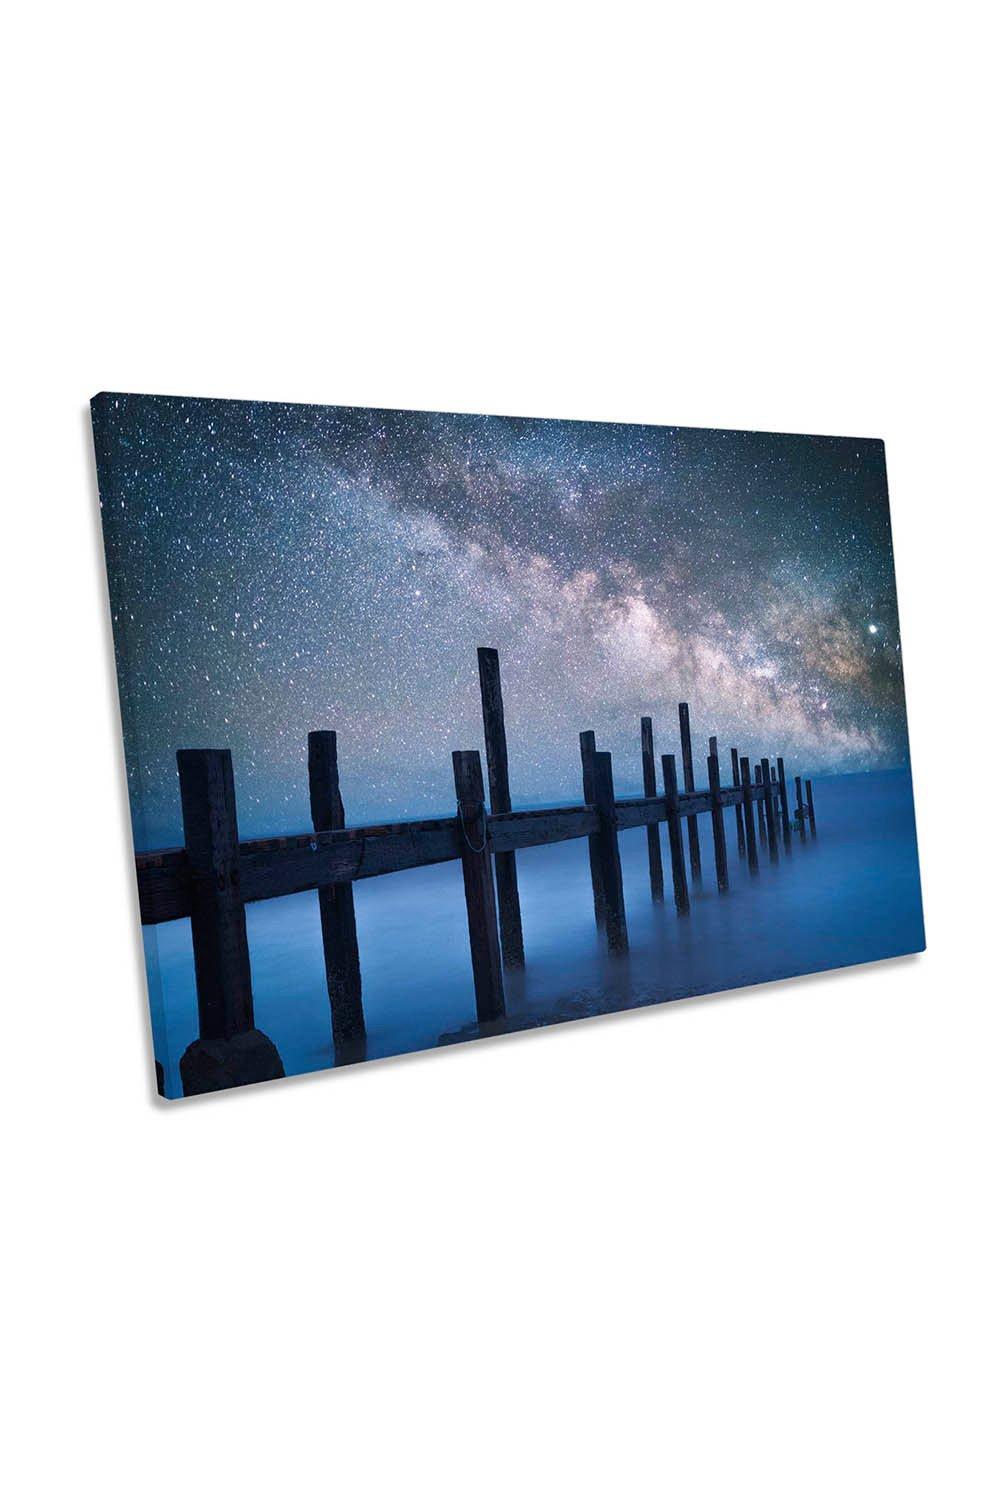 Blue Starry Night Milky Way Pier Seascape Canvas Wall Art Picture Print